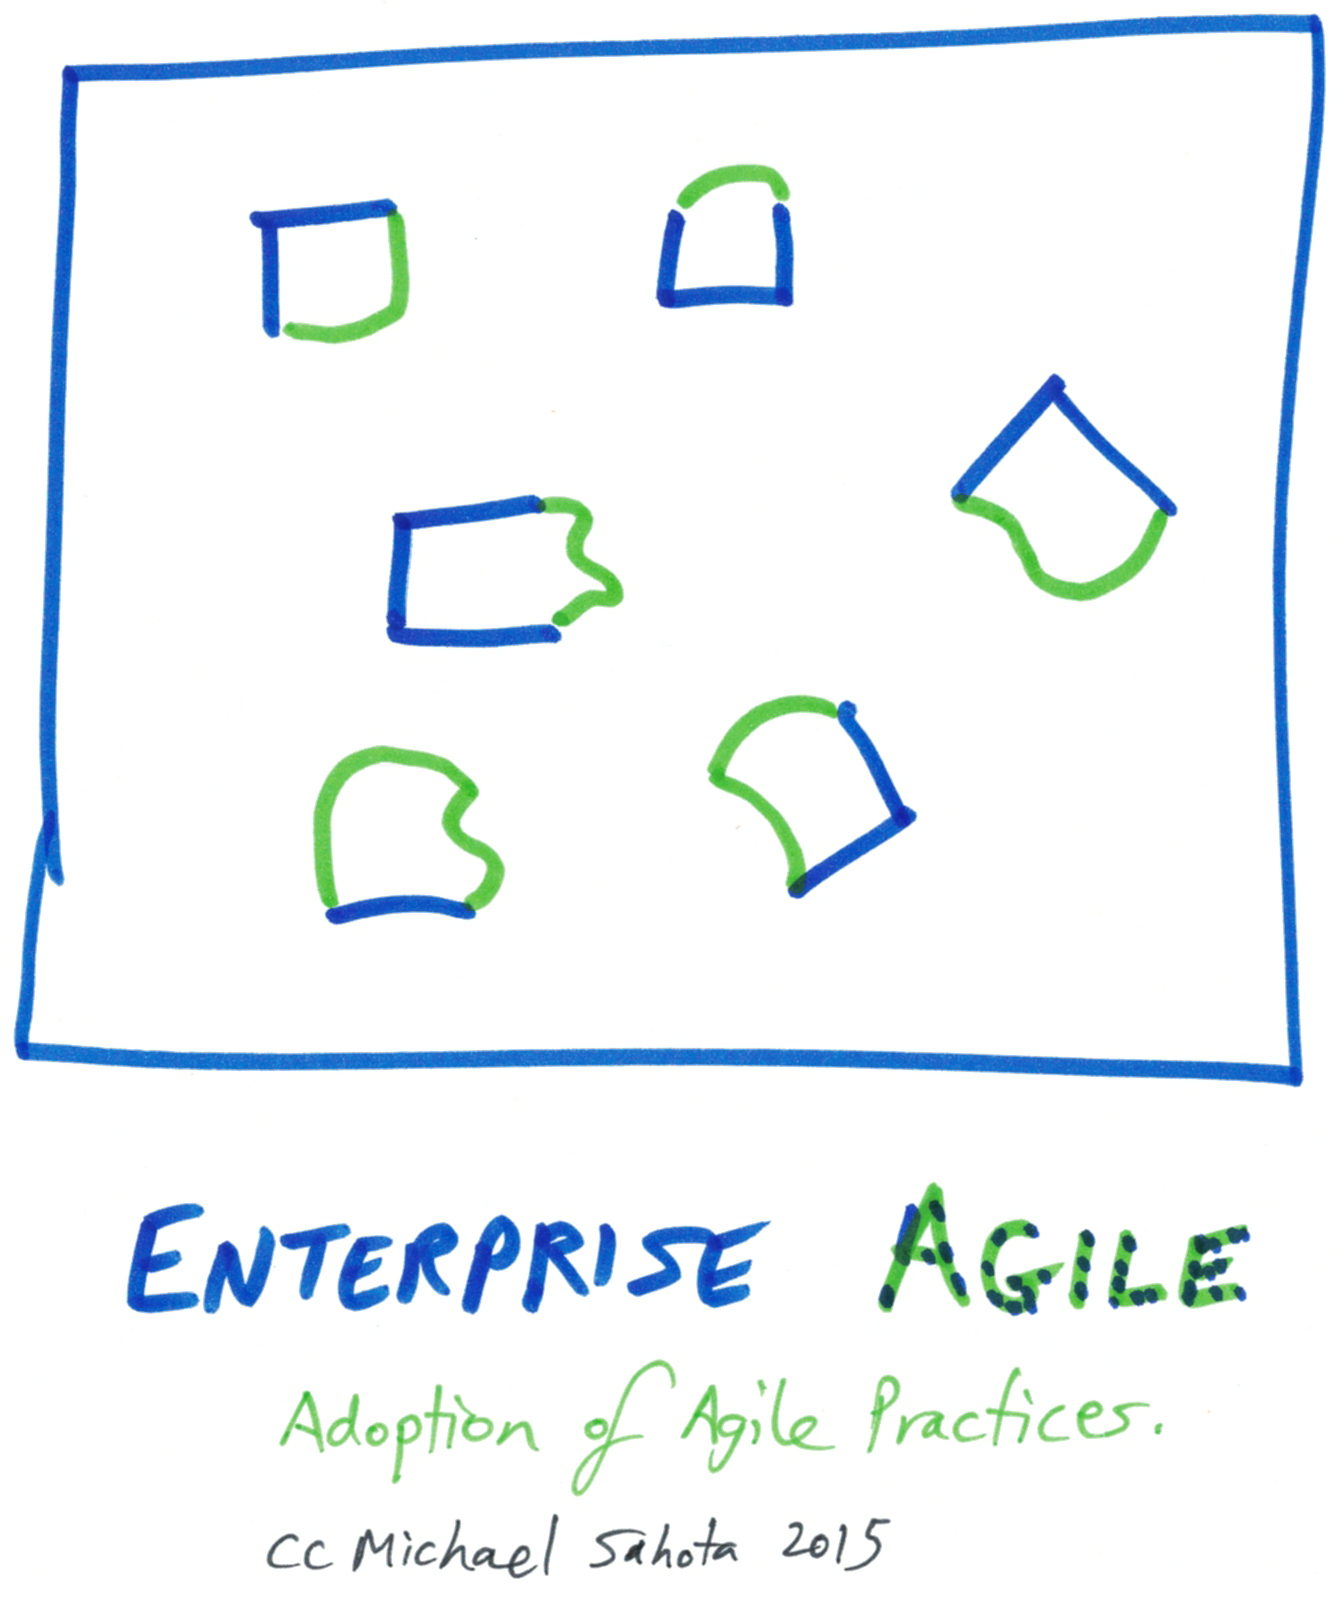 Enterprise Agile is about adopting Agile practices